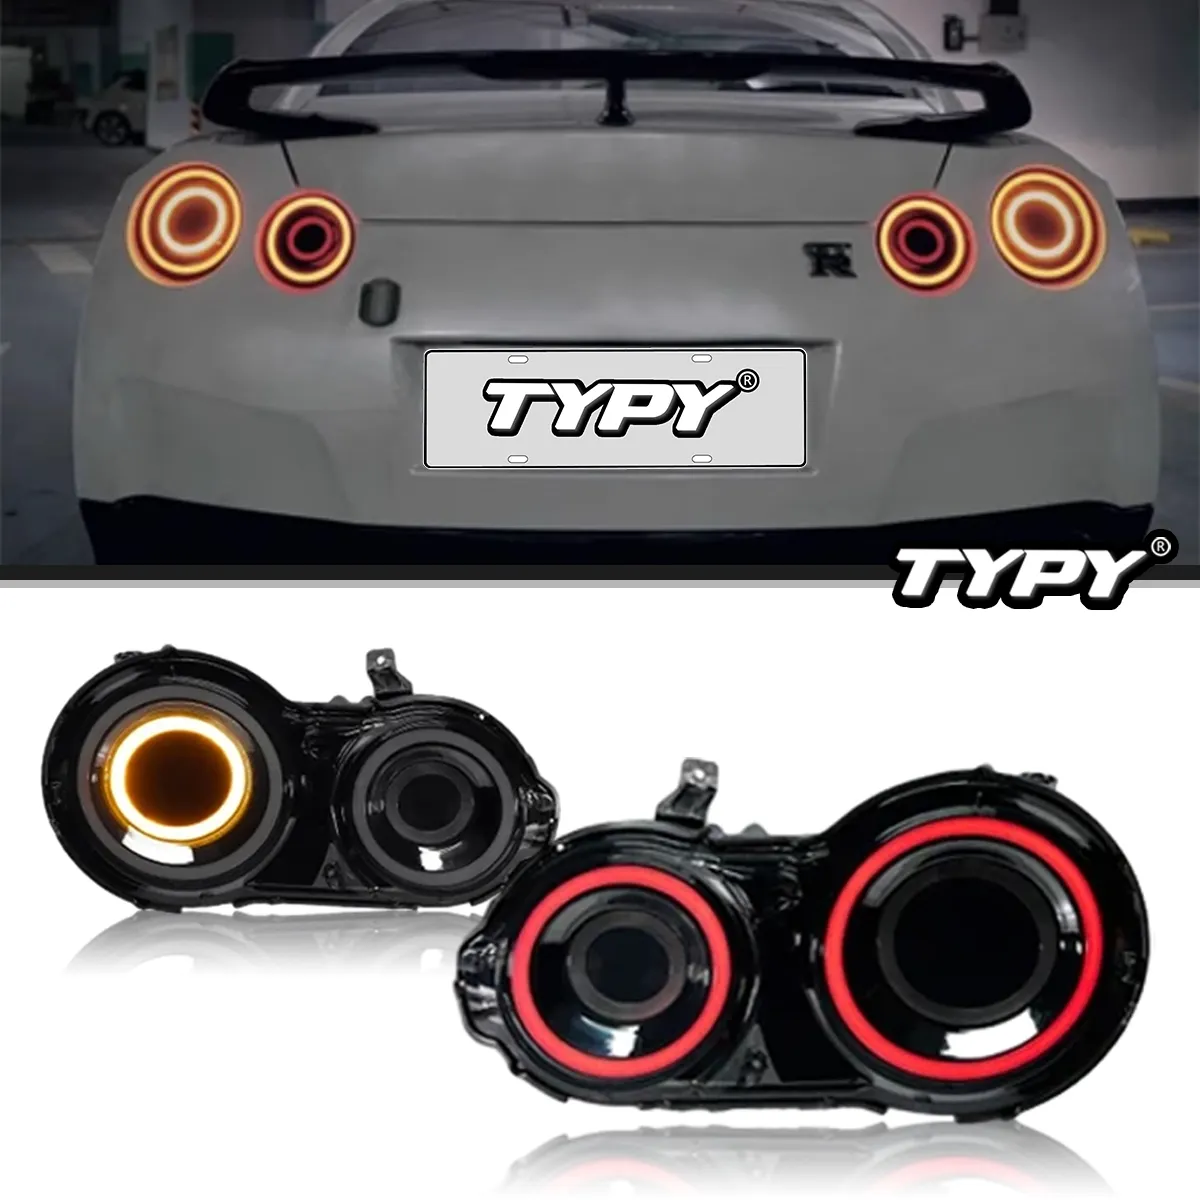 TYPY Original Wholesale Price Auto Taillight Assembly For Nissan GT-R R35 2009-2017 Upgrade Modified LED Taillight